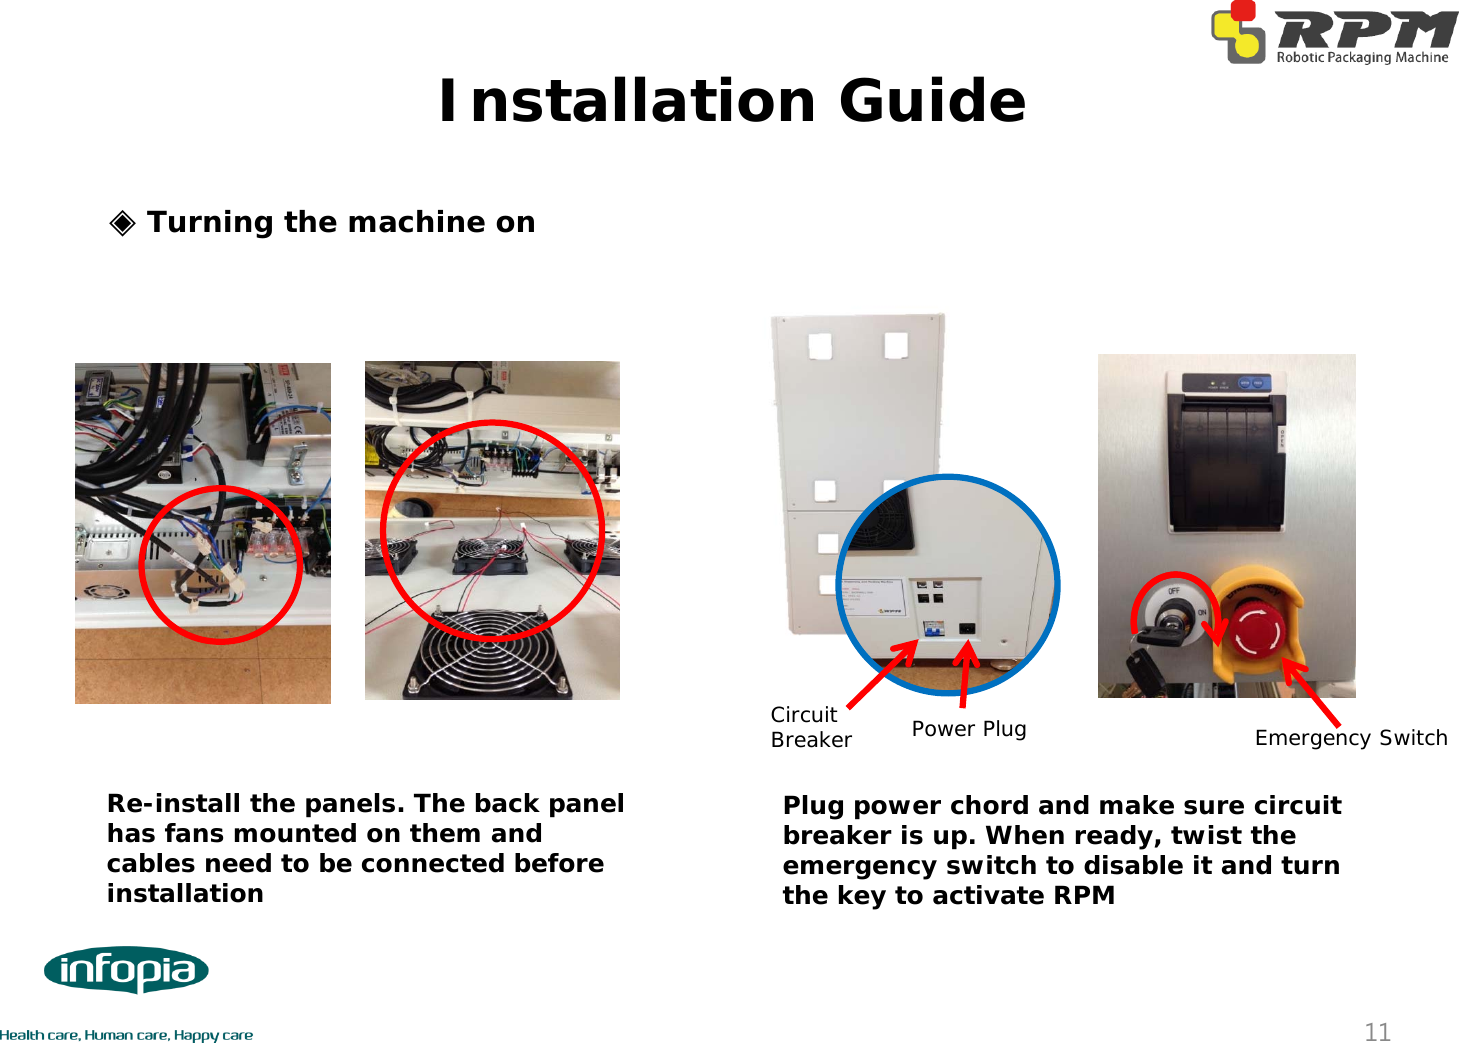 Installation Guide11◈Turning the machine onPlug power chord and make sure circuit breaker is up. When ready, twist the emergency switch to disable it and turn the key to activate RPMRe-install the panels. The back panel has fans mounted on them and cables need to be connected before installationPower PlugCircuit Breaker Emergency Switch